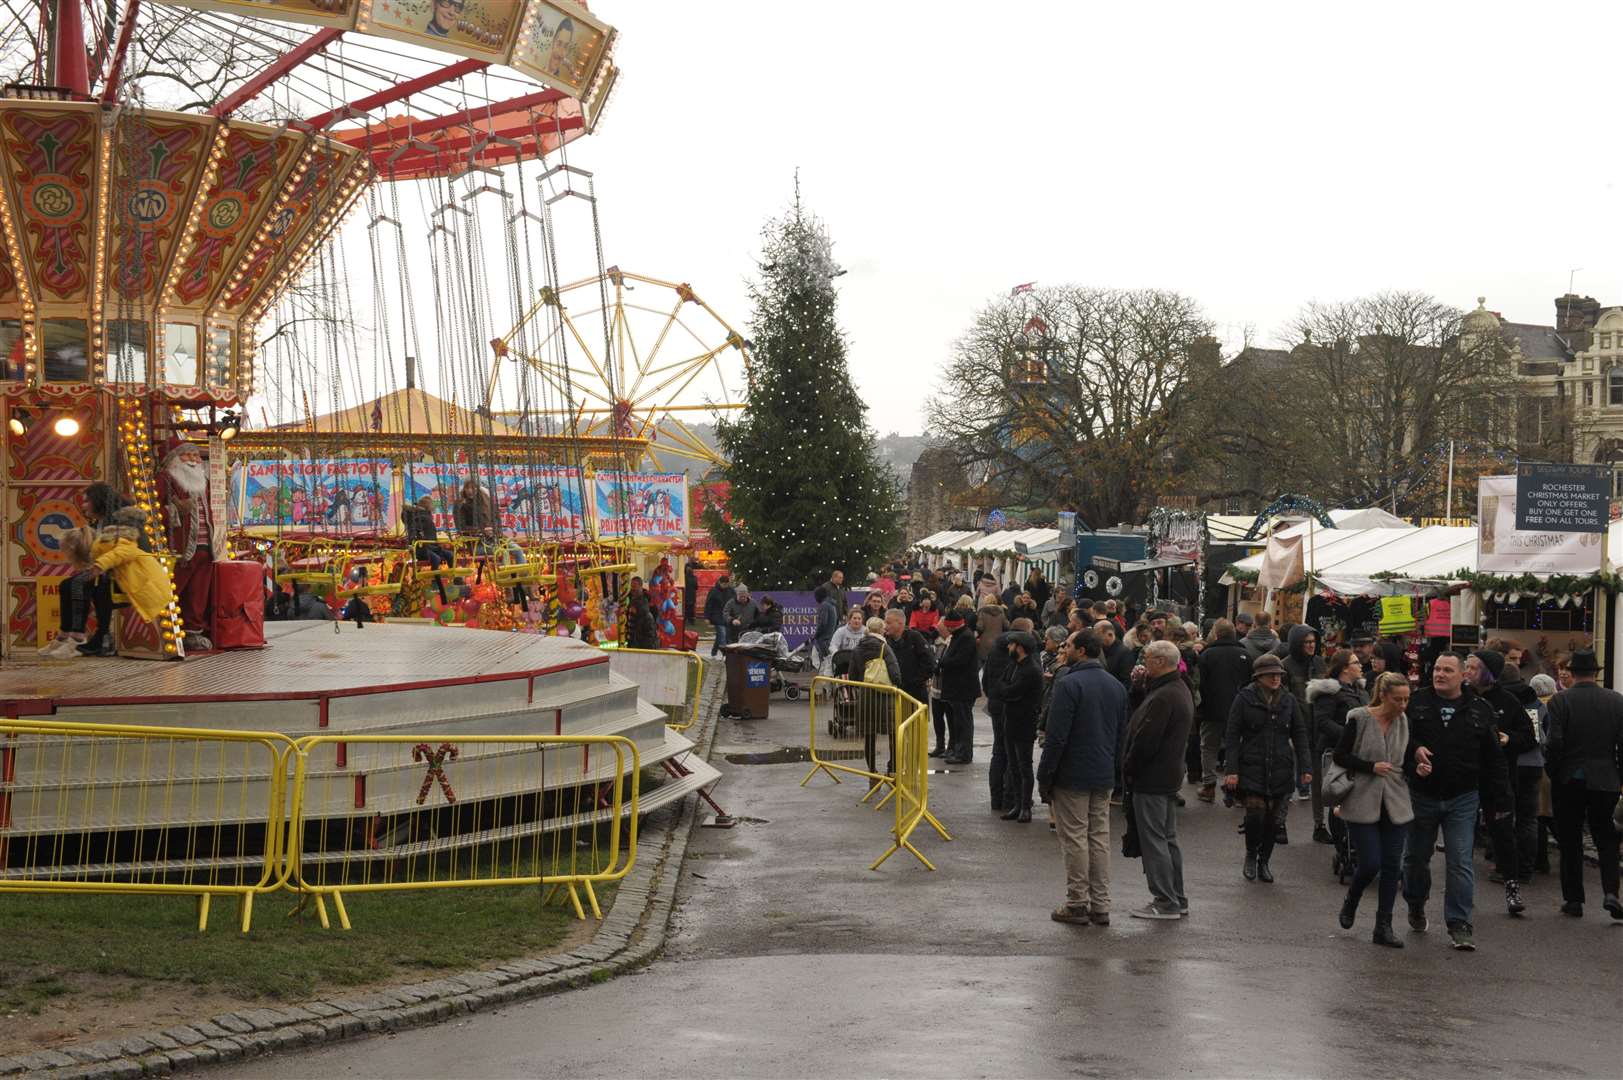 The Christmas market in Rochester was last held in 2019 but will return after a year out due to Covid lockdown in 2020